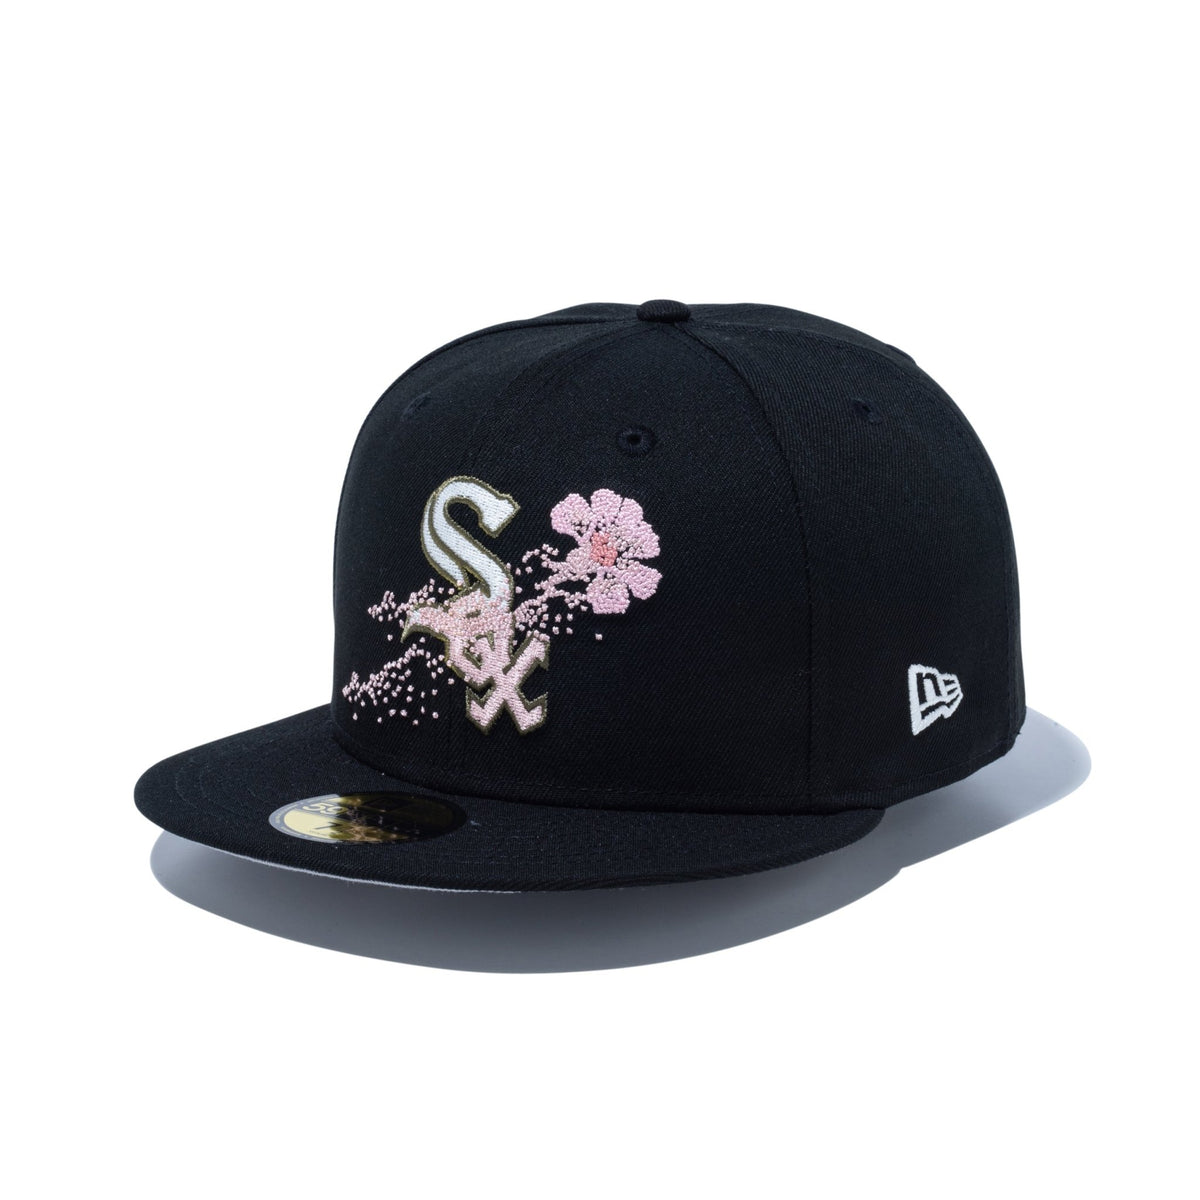 59FIFTY Dotted Floral シカゴ・ホワイトソックス ブラック